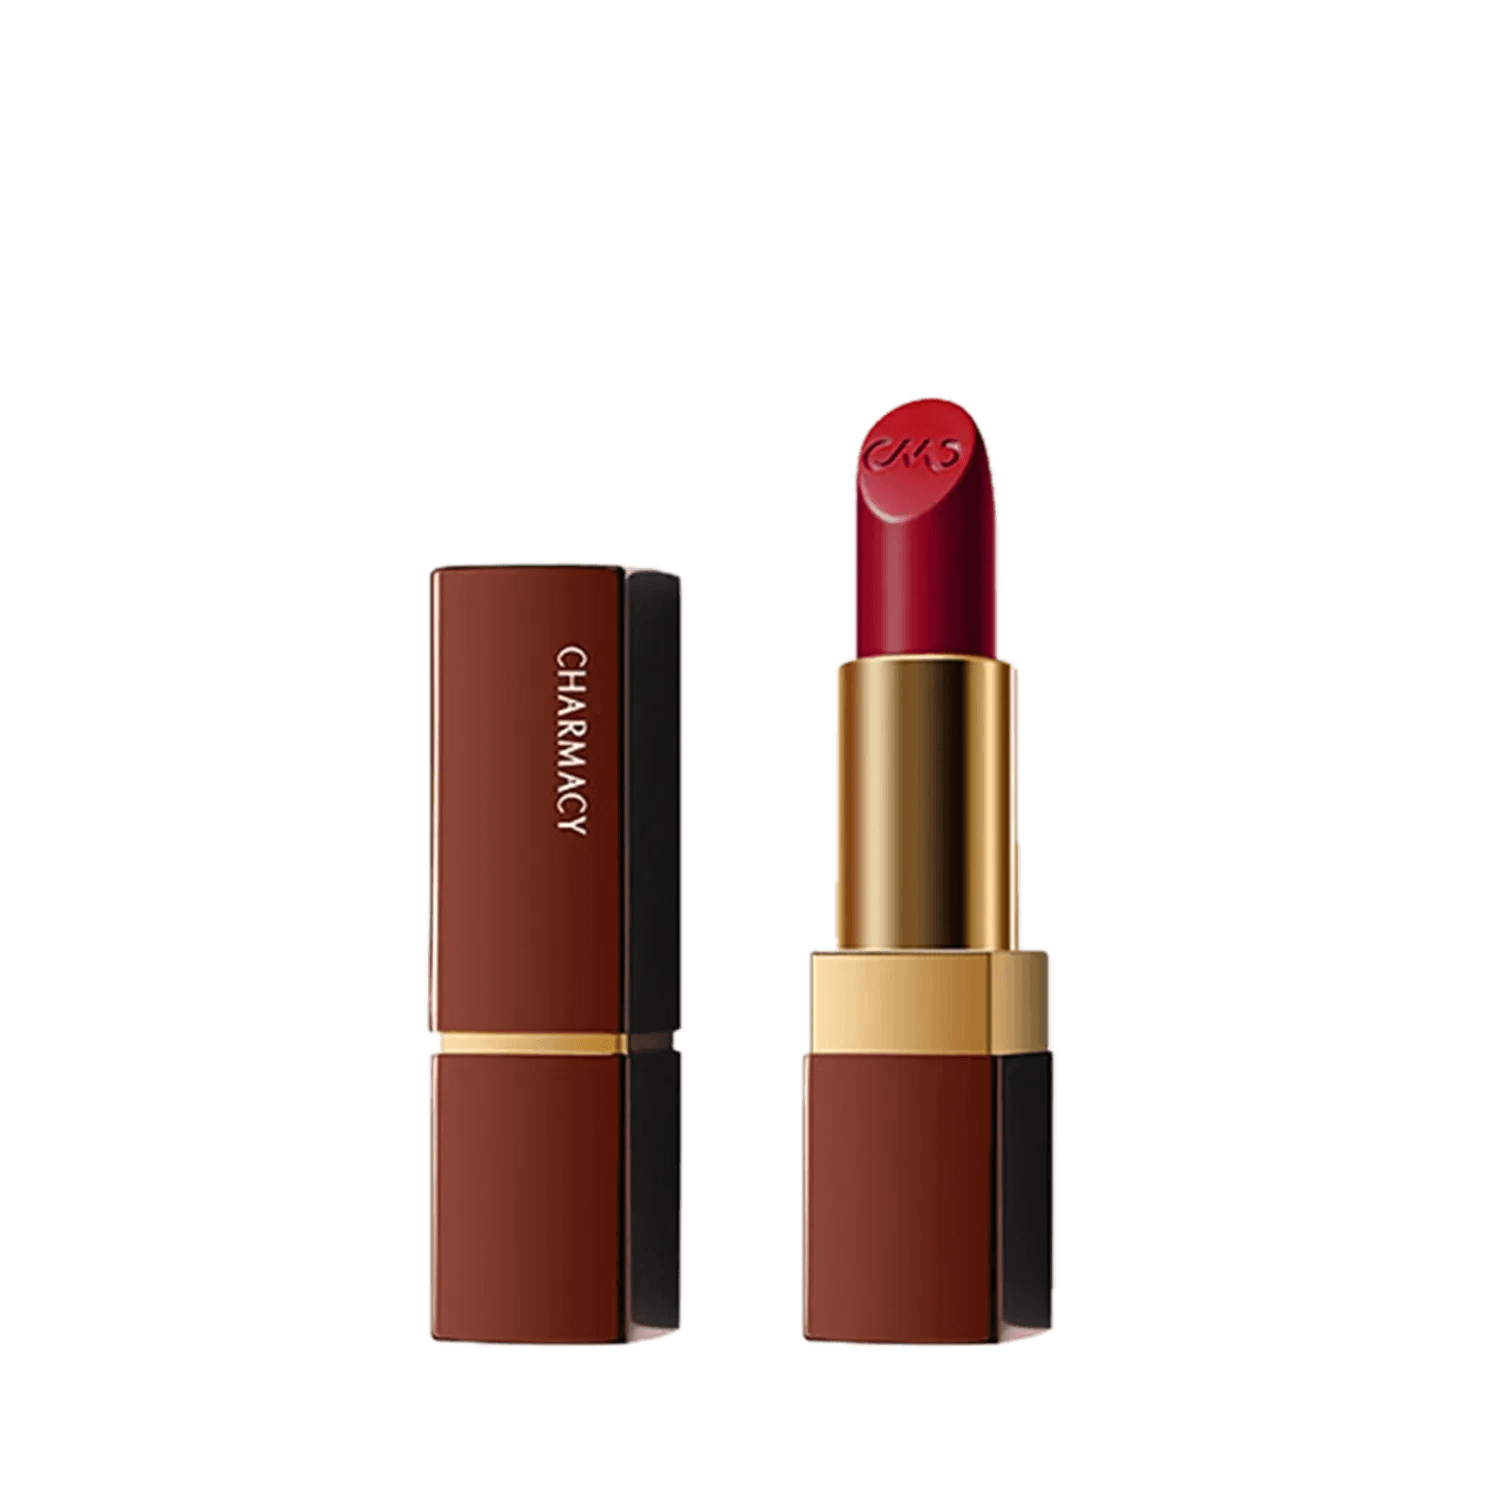 Charmacy Milano | Charmacy Milano Luxe Crème Lipstick - Rich Rose Wood No. 14 - (3.8gm)